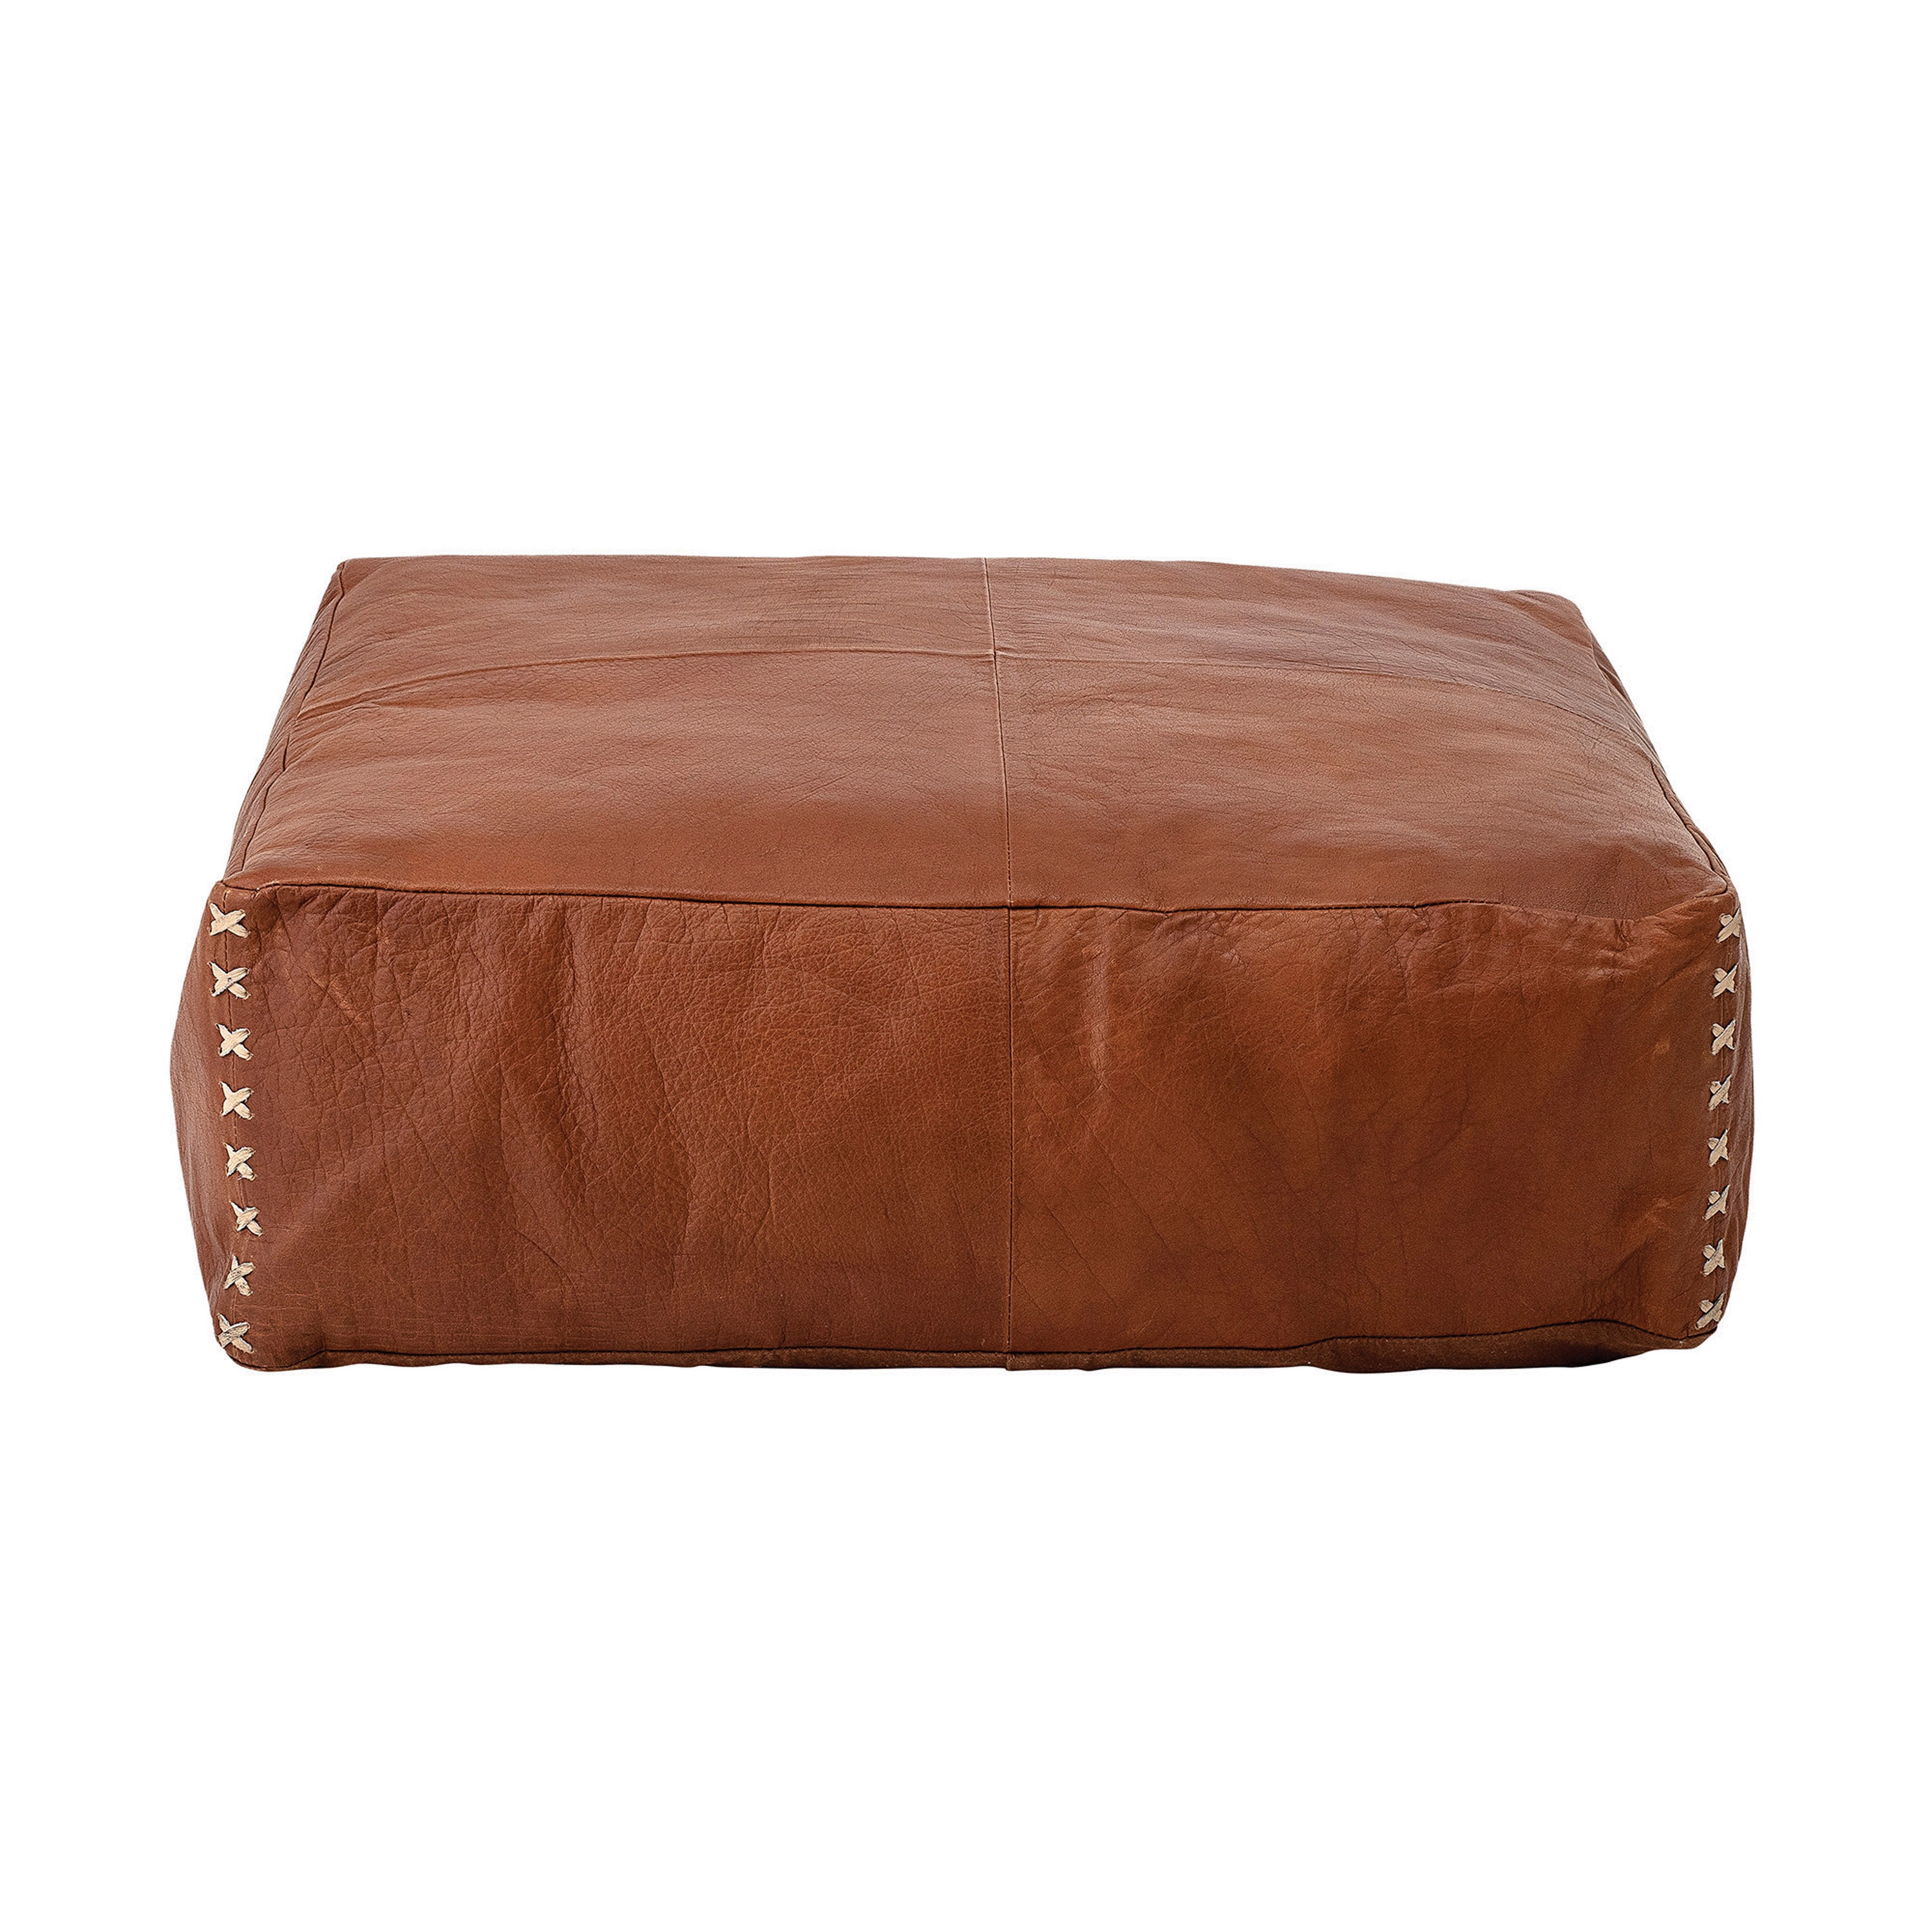 Tobacco Brown Leather Pouf with Off-White Stitch Detail - Image 0